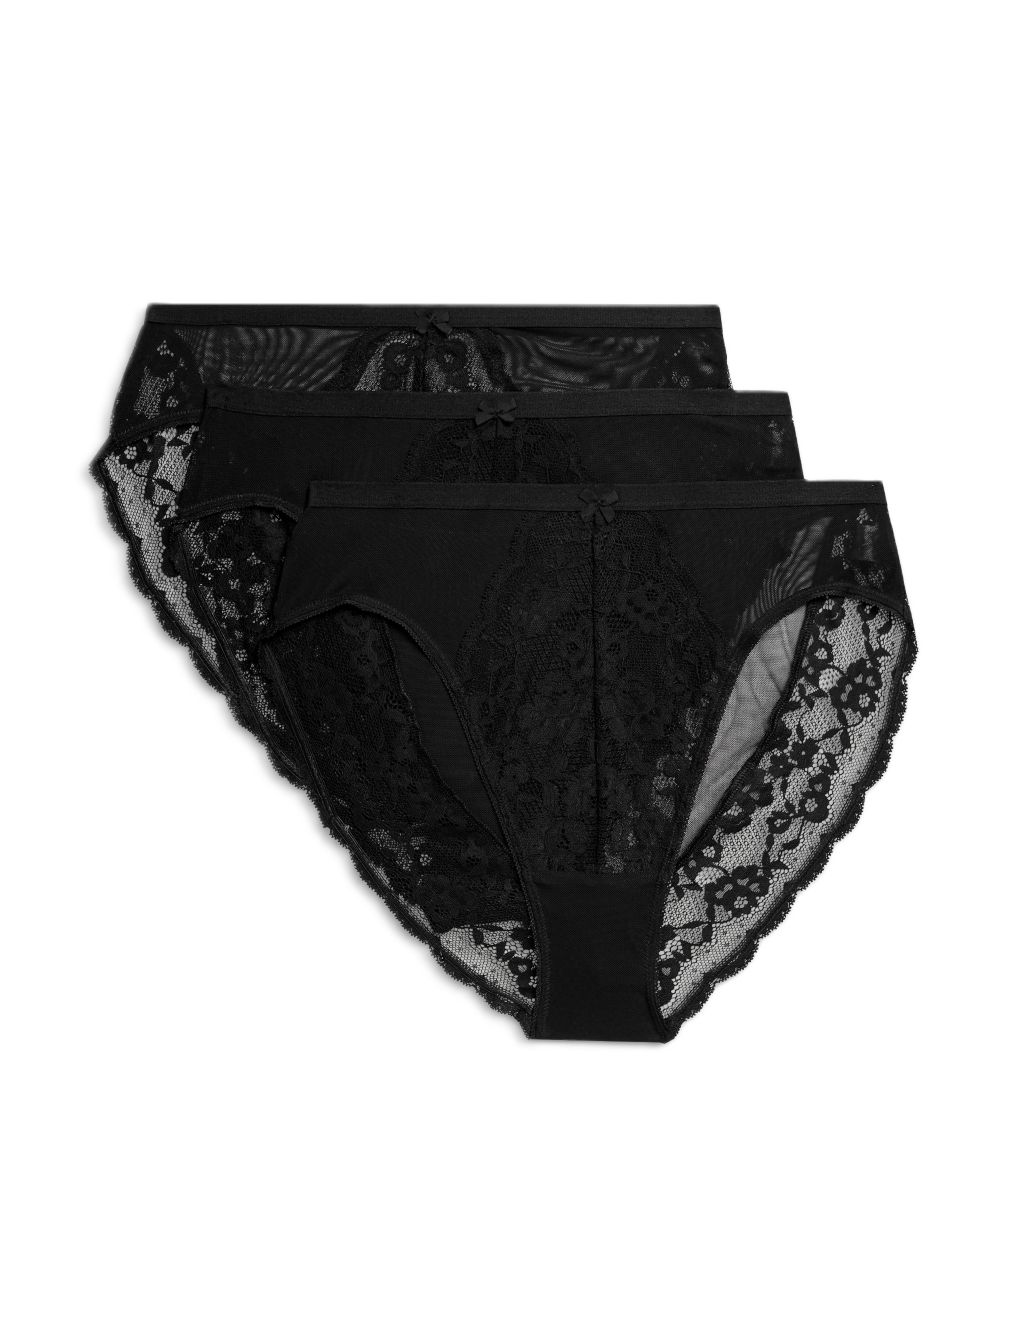 M&S High Waist Lace Trim Figure Control Sissy Knickers - Size 8 to 20  (210101)